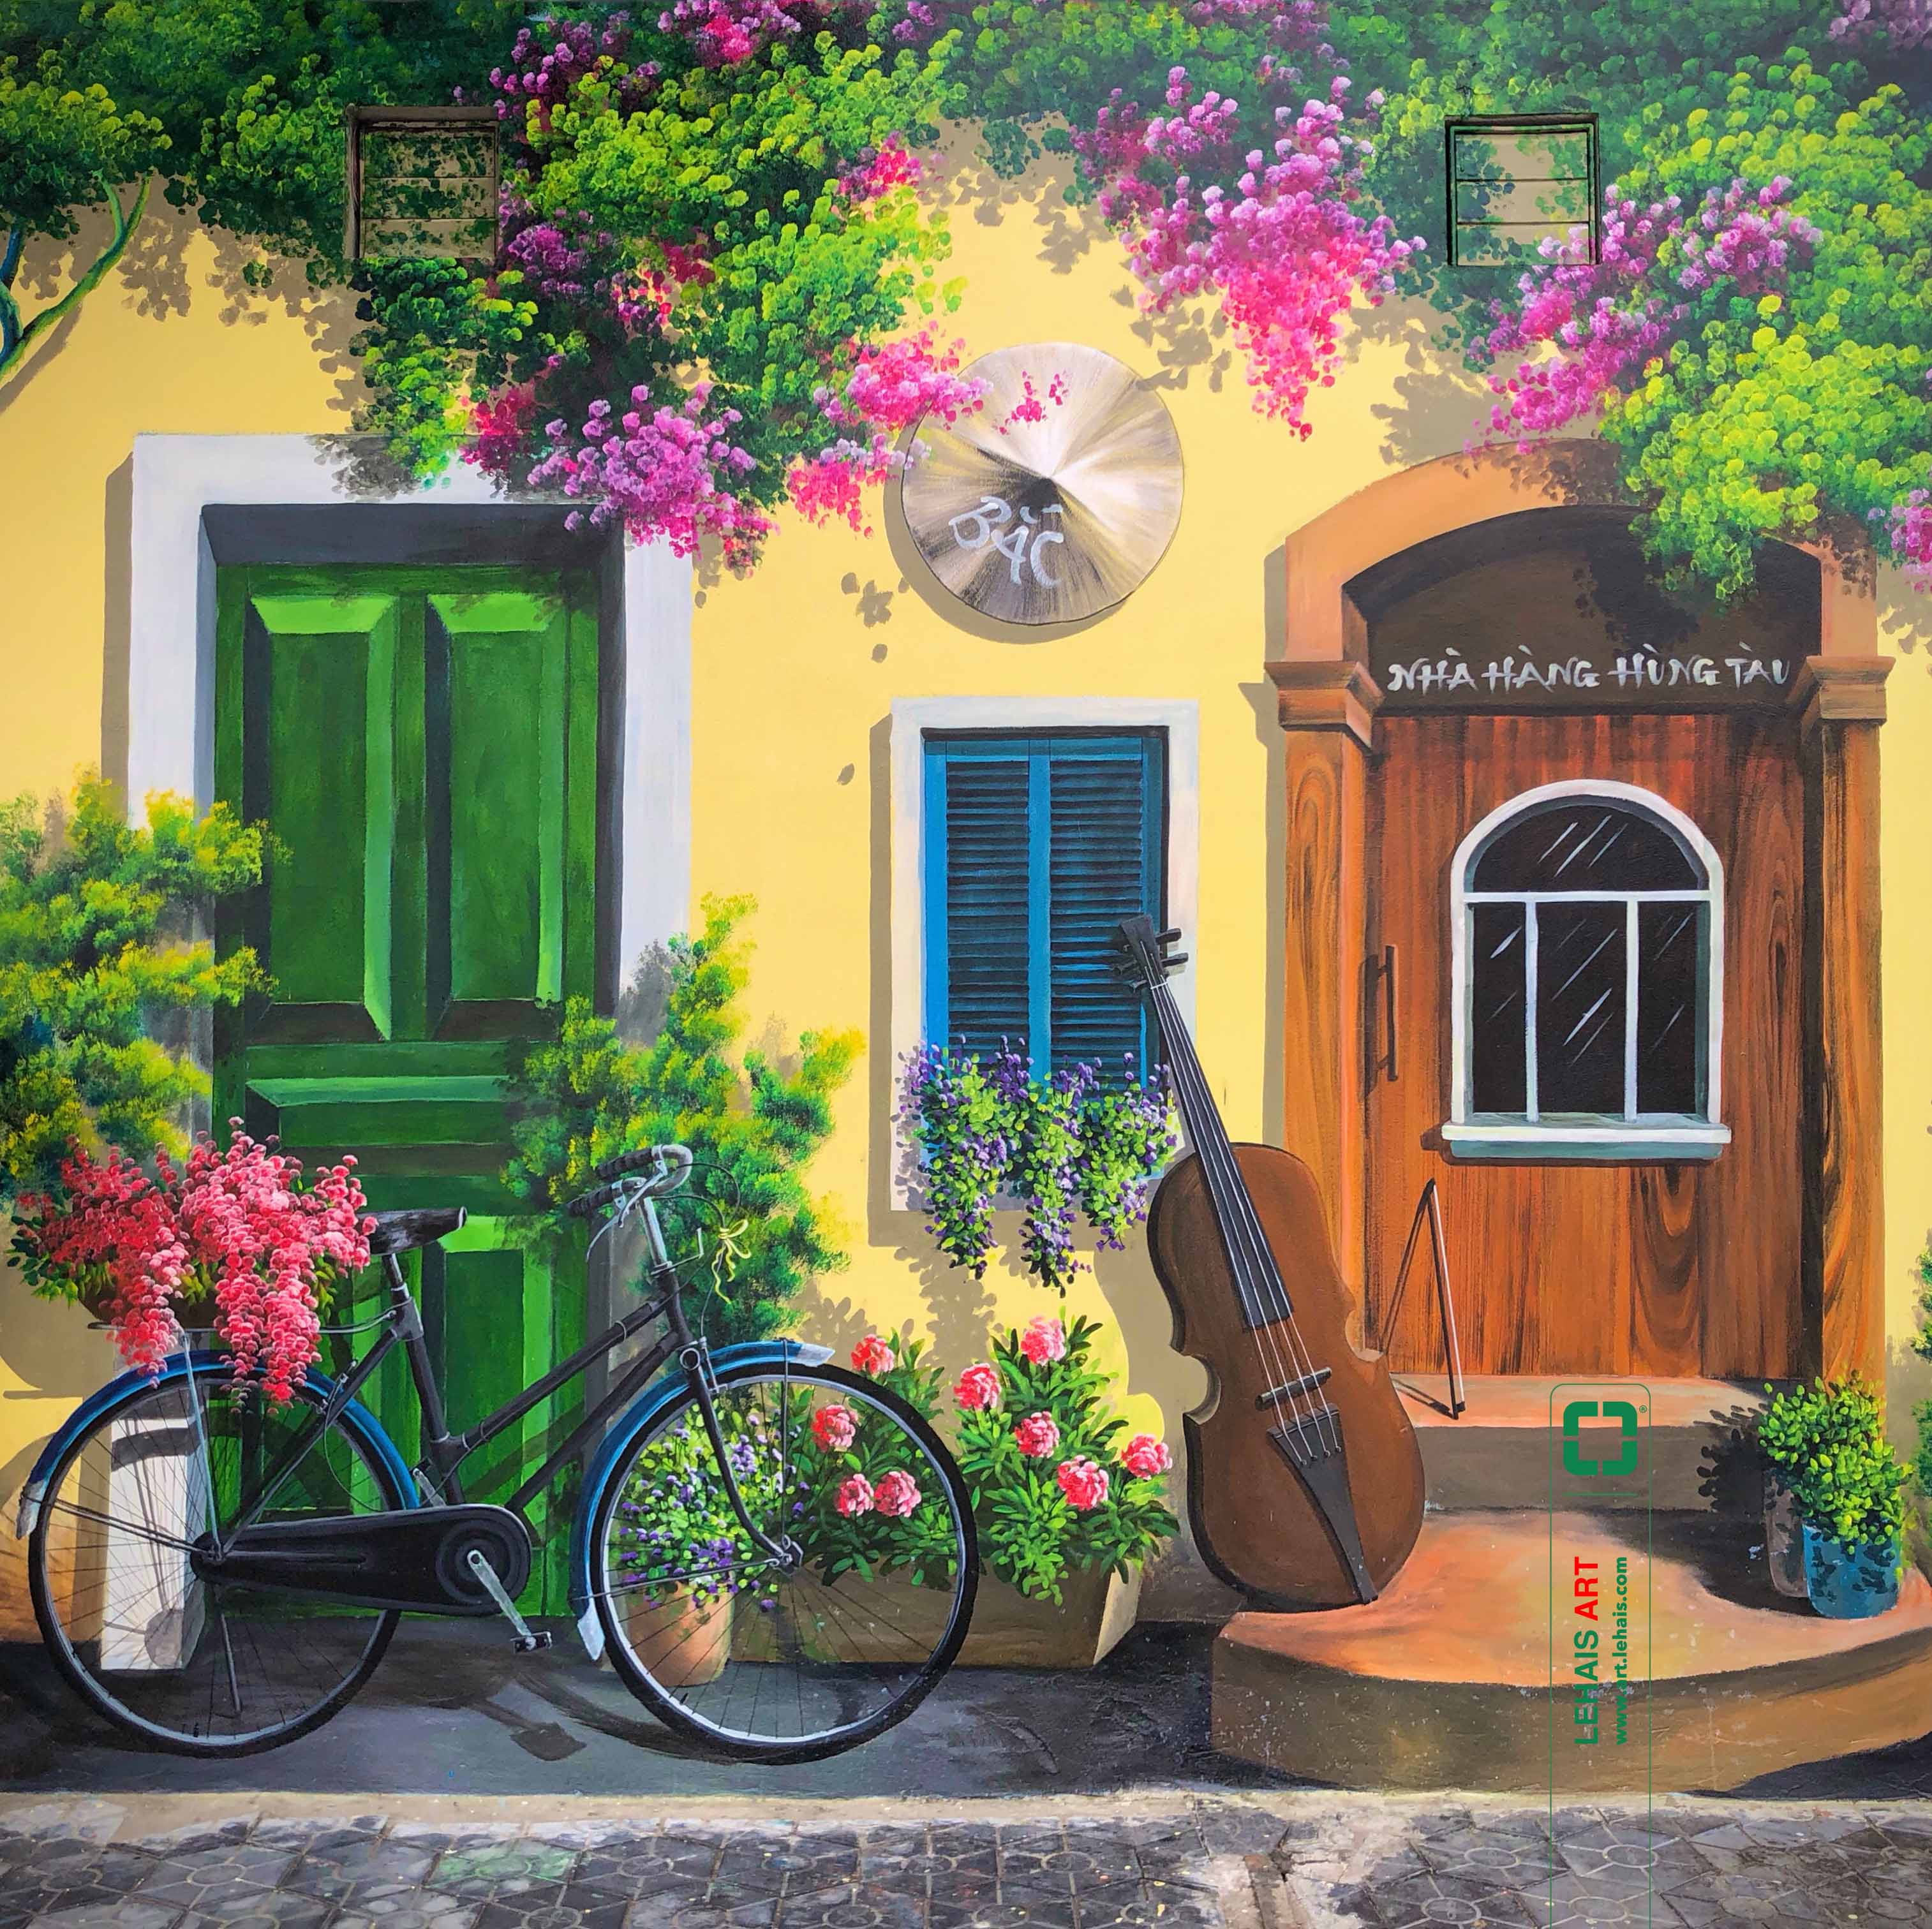 Painting 3D wall decoration at Hung Tau Restaurant in Pho Noi, Hung Yen - TT198LHAR